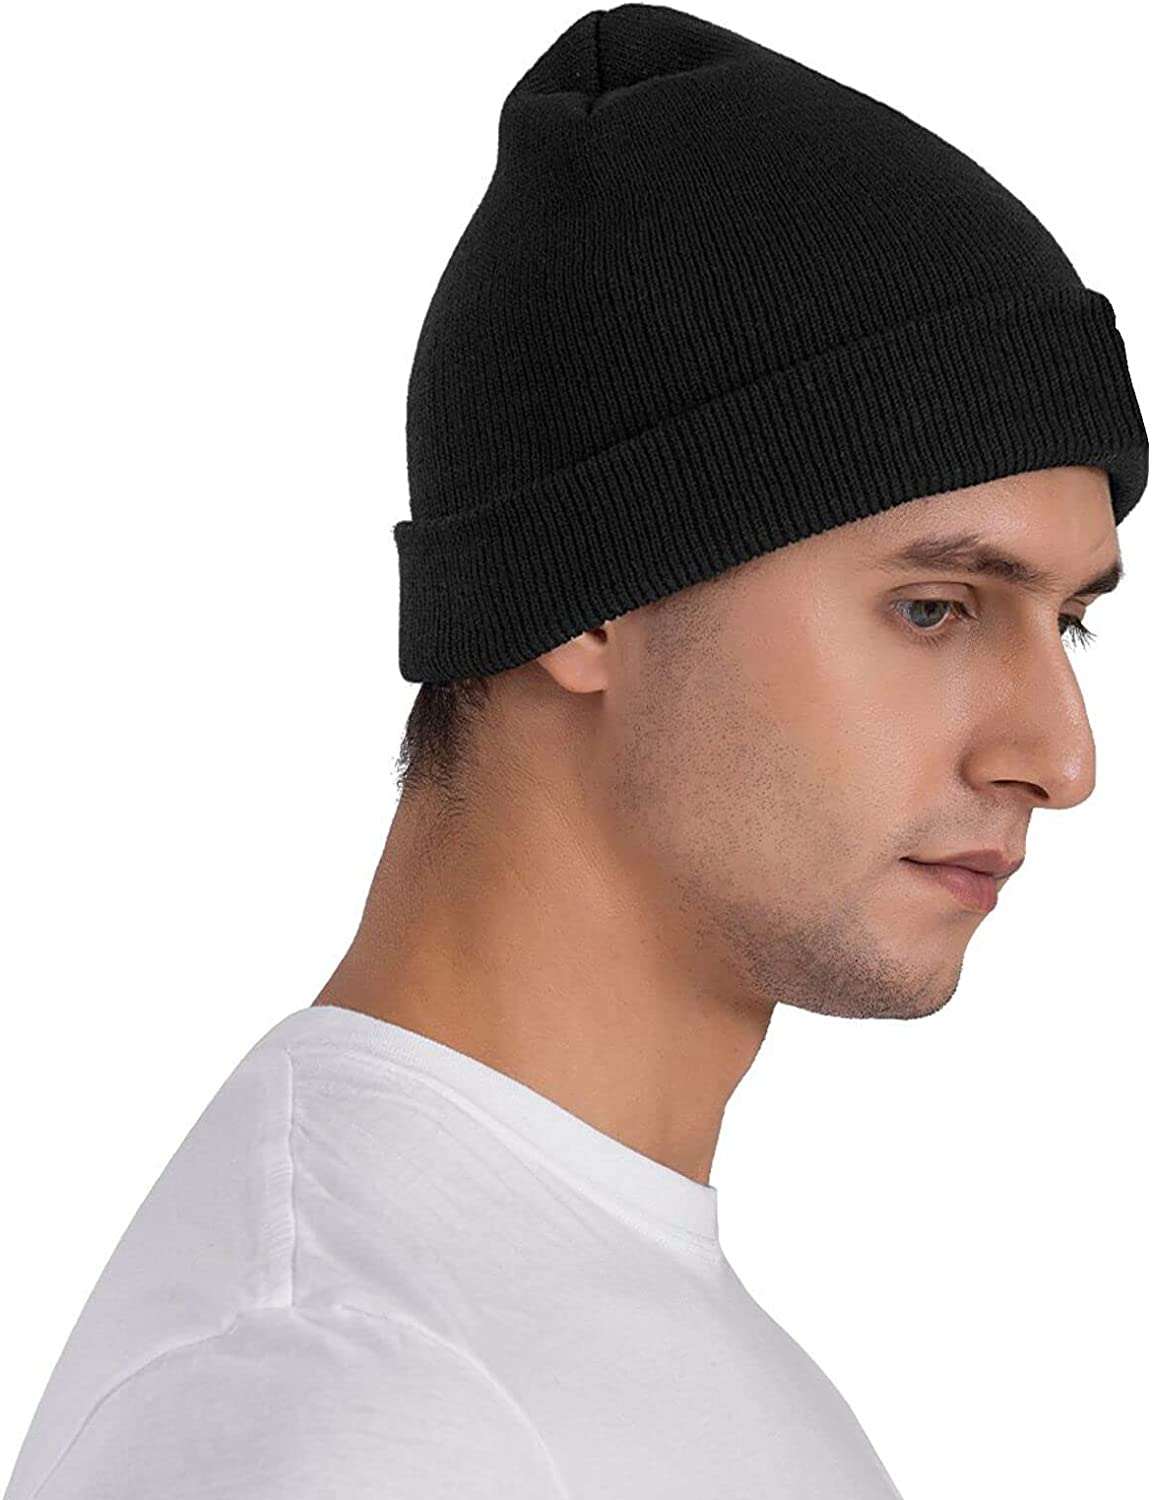 gogoherhome Suicide Logo Boys Knit Hats Beanie for Men Women Warm  Embroidered Soft Stretchy Toboggan Cap for Cold Weather Black